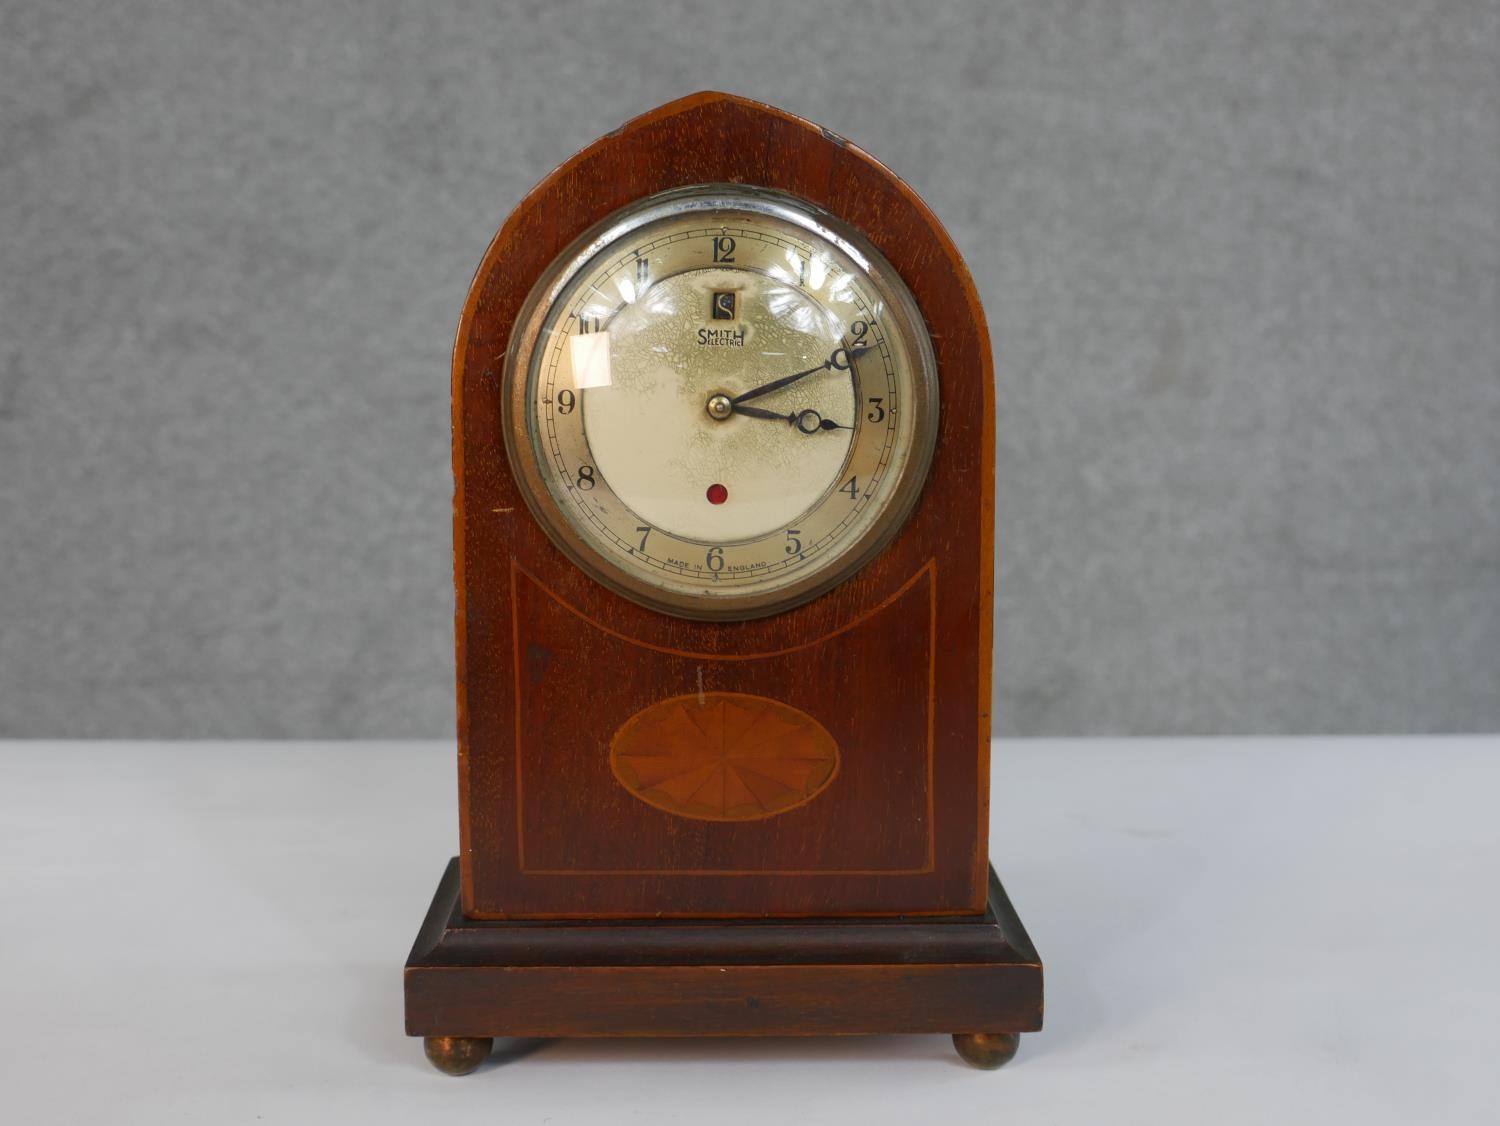 An early 20th century Smith Electric mahogany lancet form mantel clock, the case with marquetry